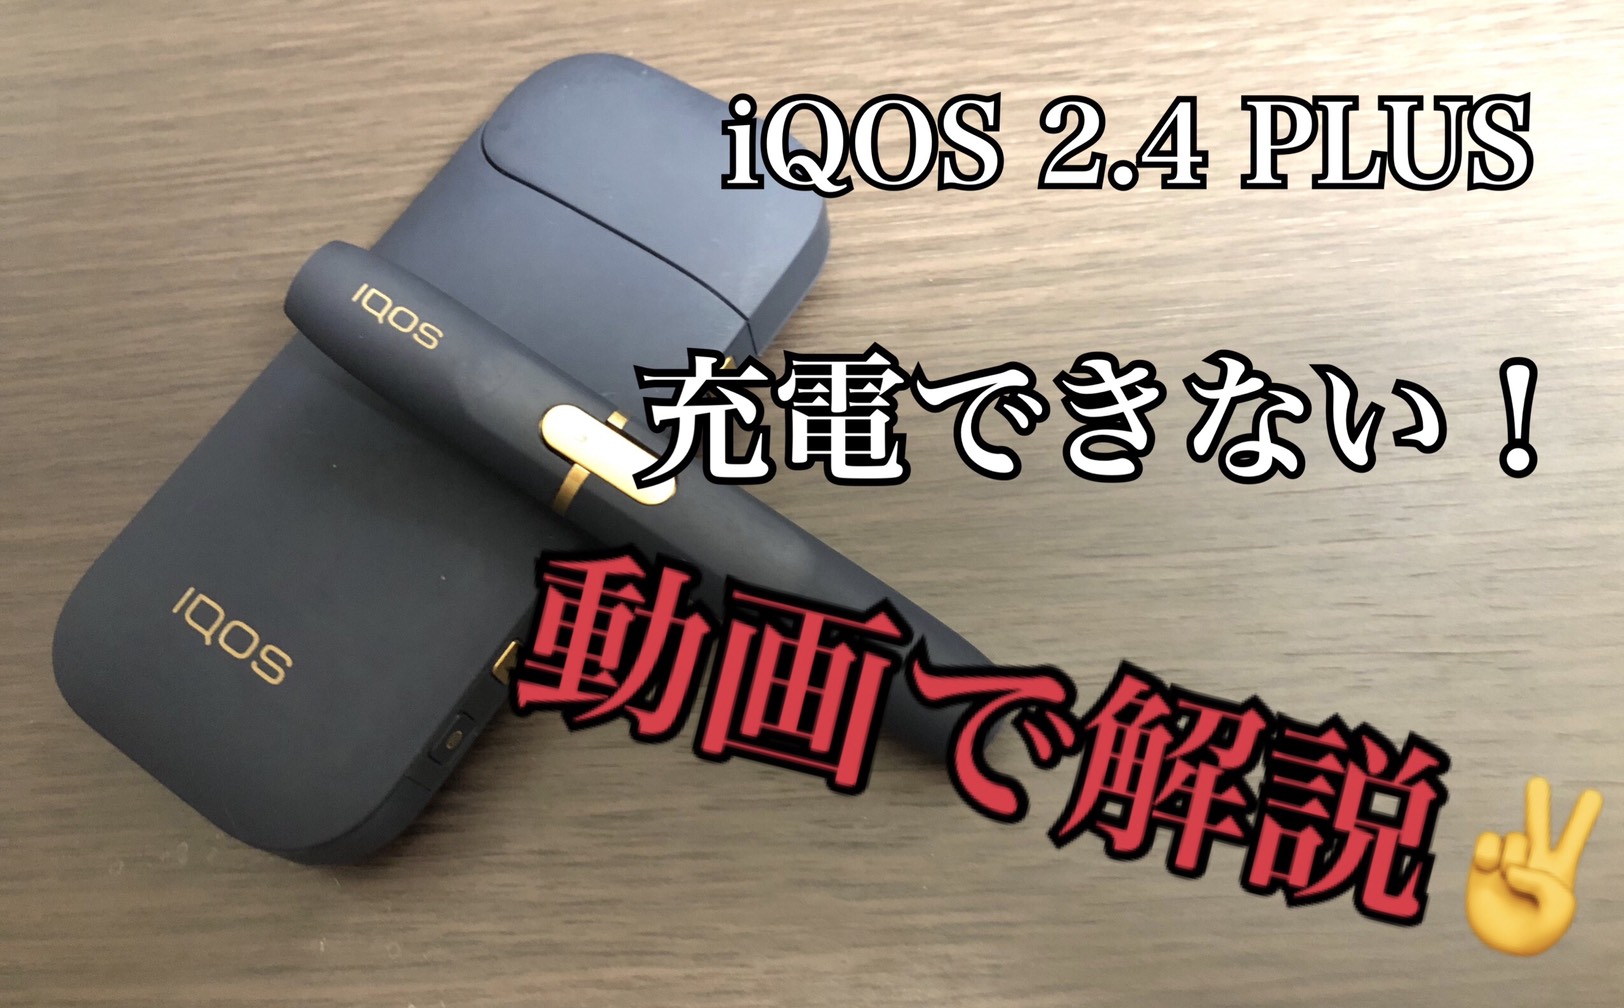 iqos 2.4 plus charging trouble eye catch